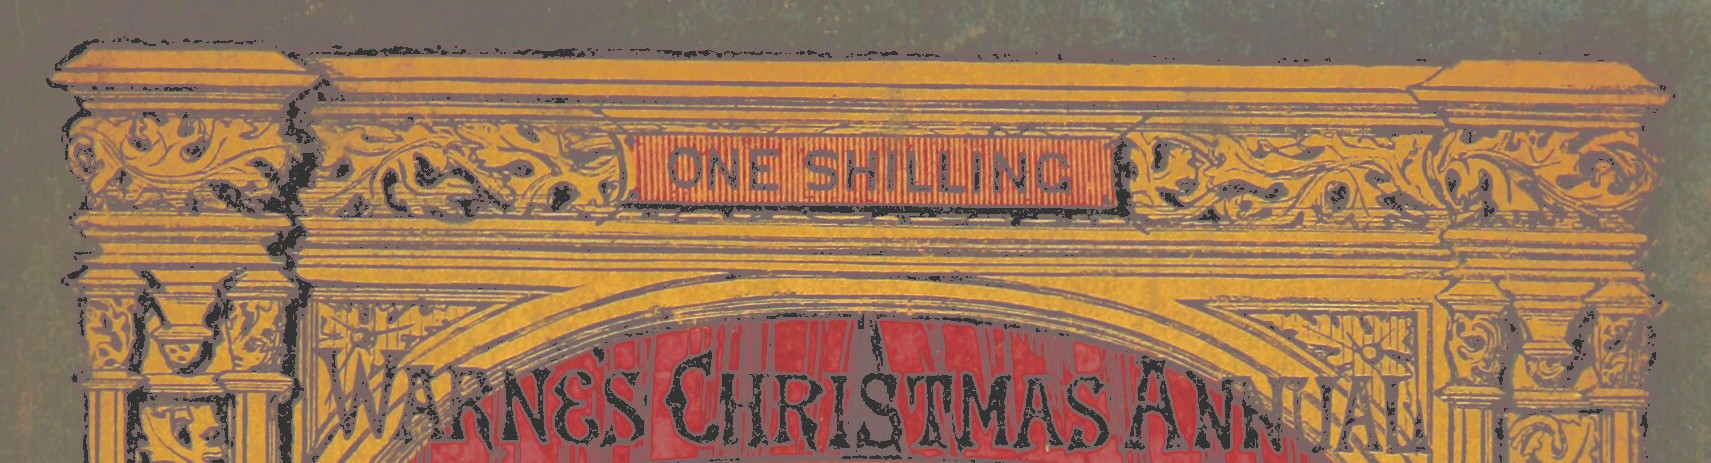 A snippet of a historical pamphlet for Warne's Christmas Annual costing one shilling